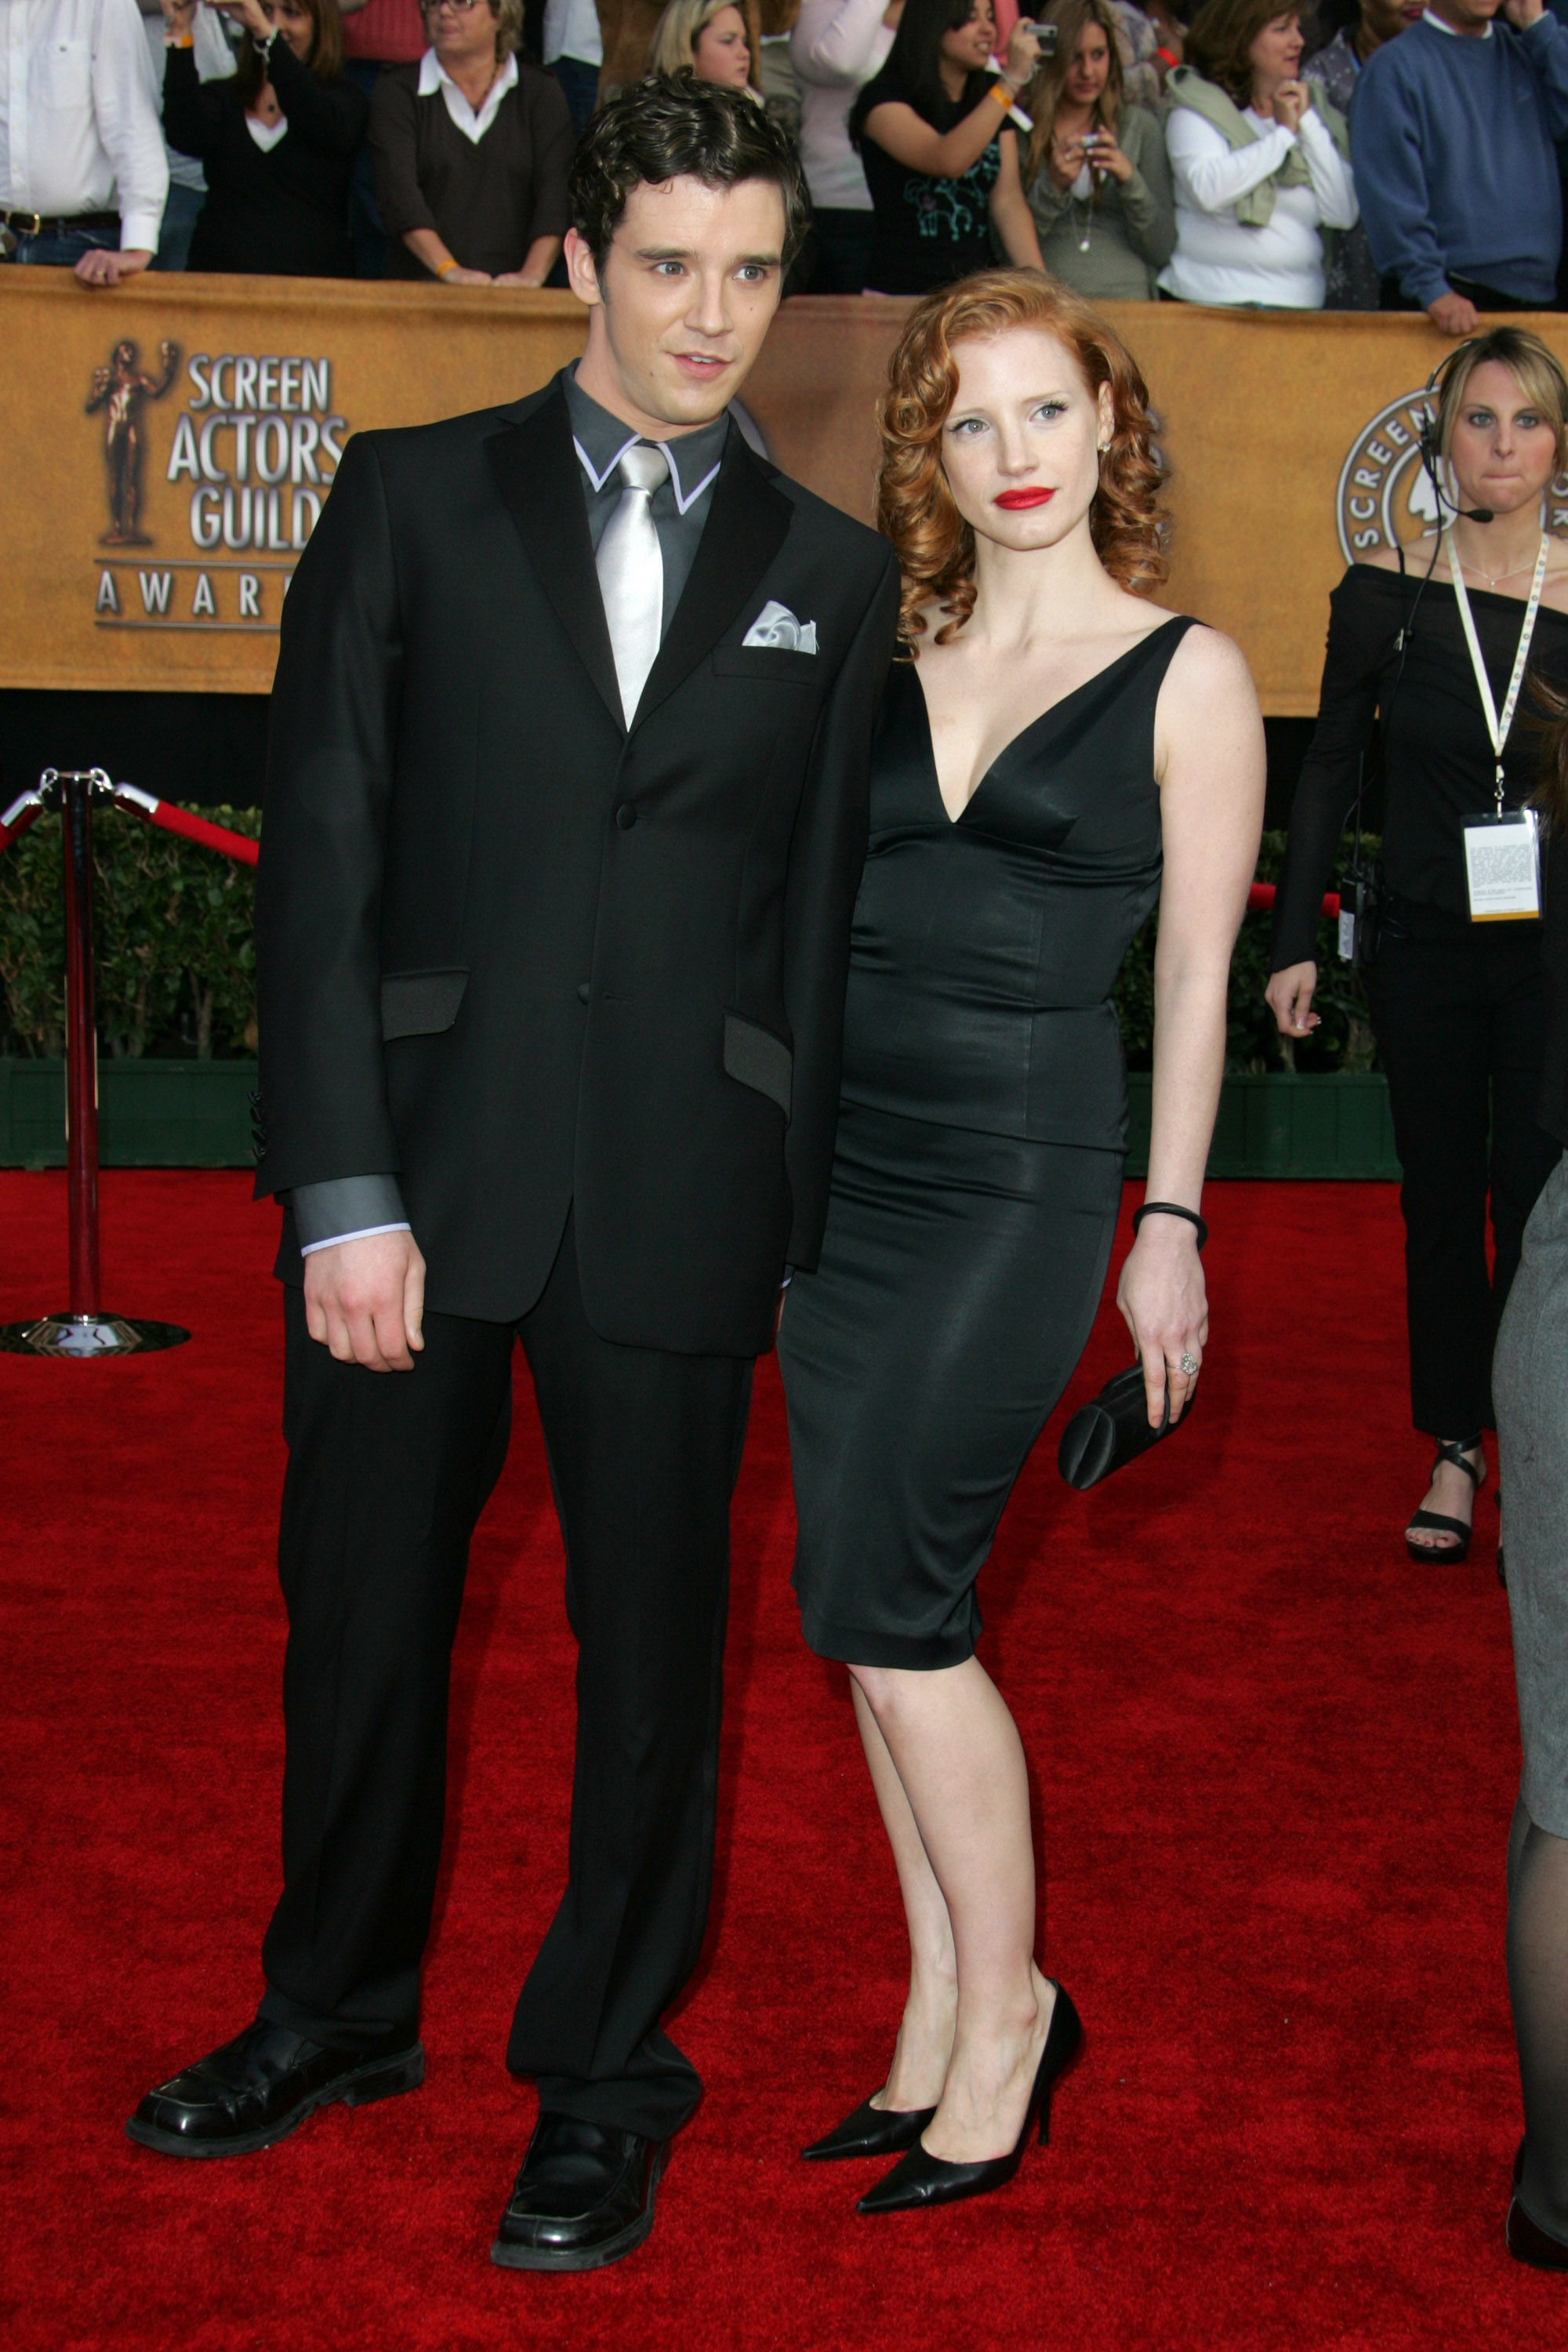 the pair on the red carpet